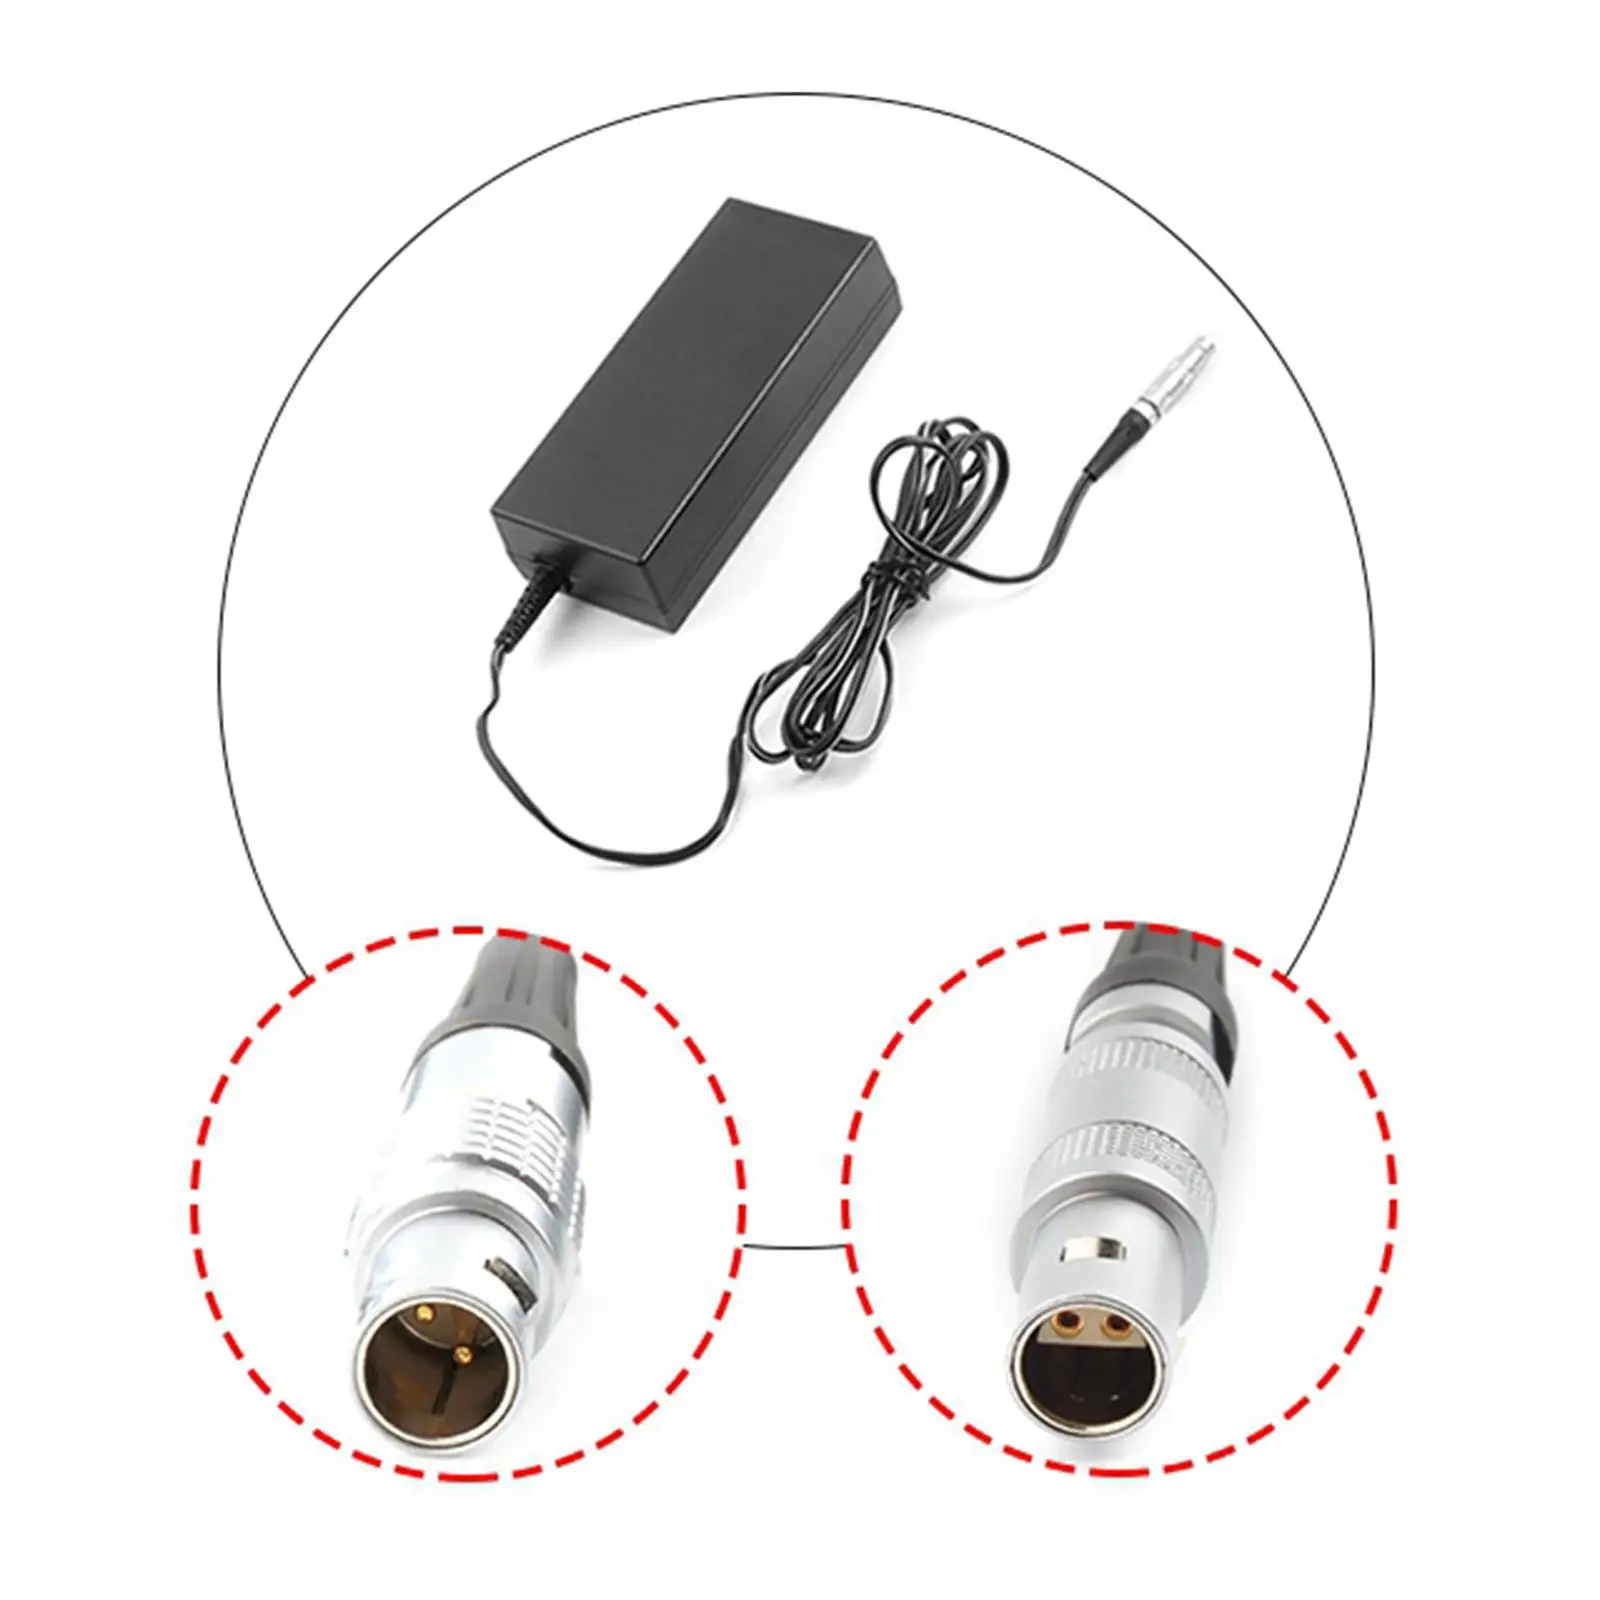 2 power Adapter Supply Adapter Converter Power Cable solid 3M Wire for E2-S6 E2-F8 Camera E2-F6